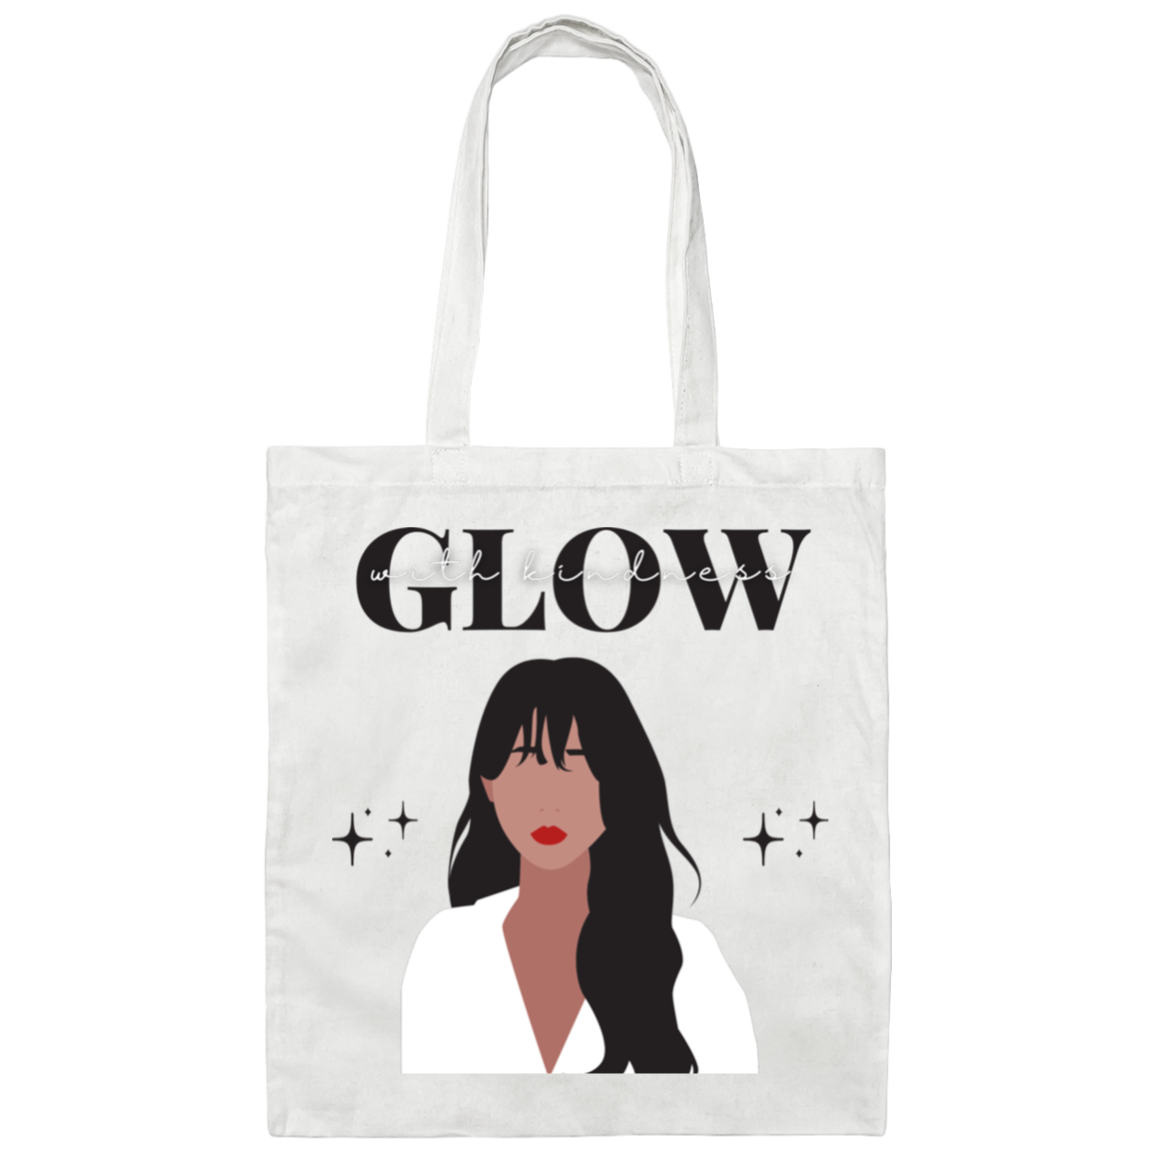 Glow With Kindness Canvas Tote Bag